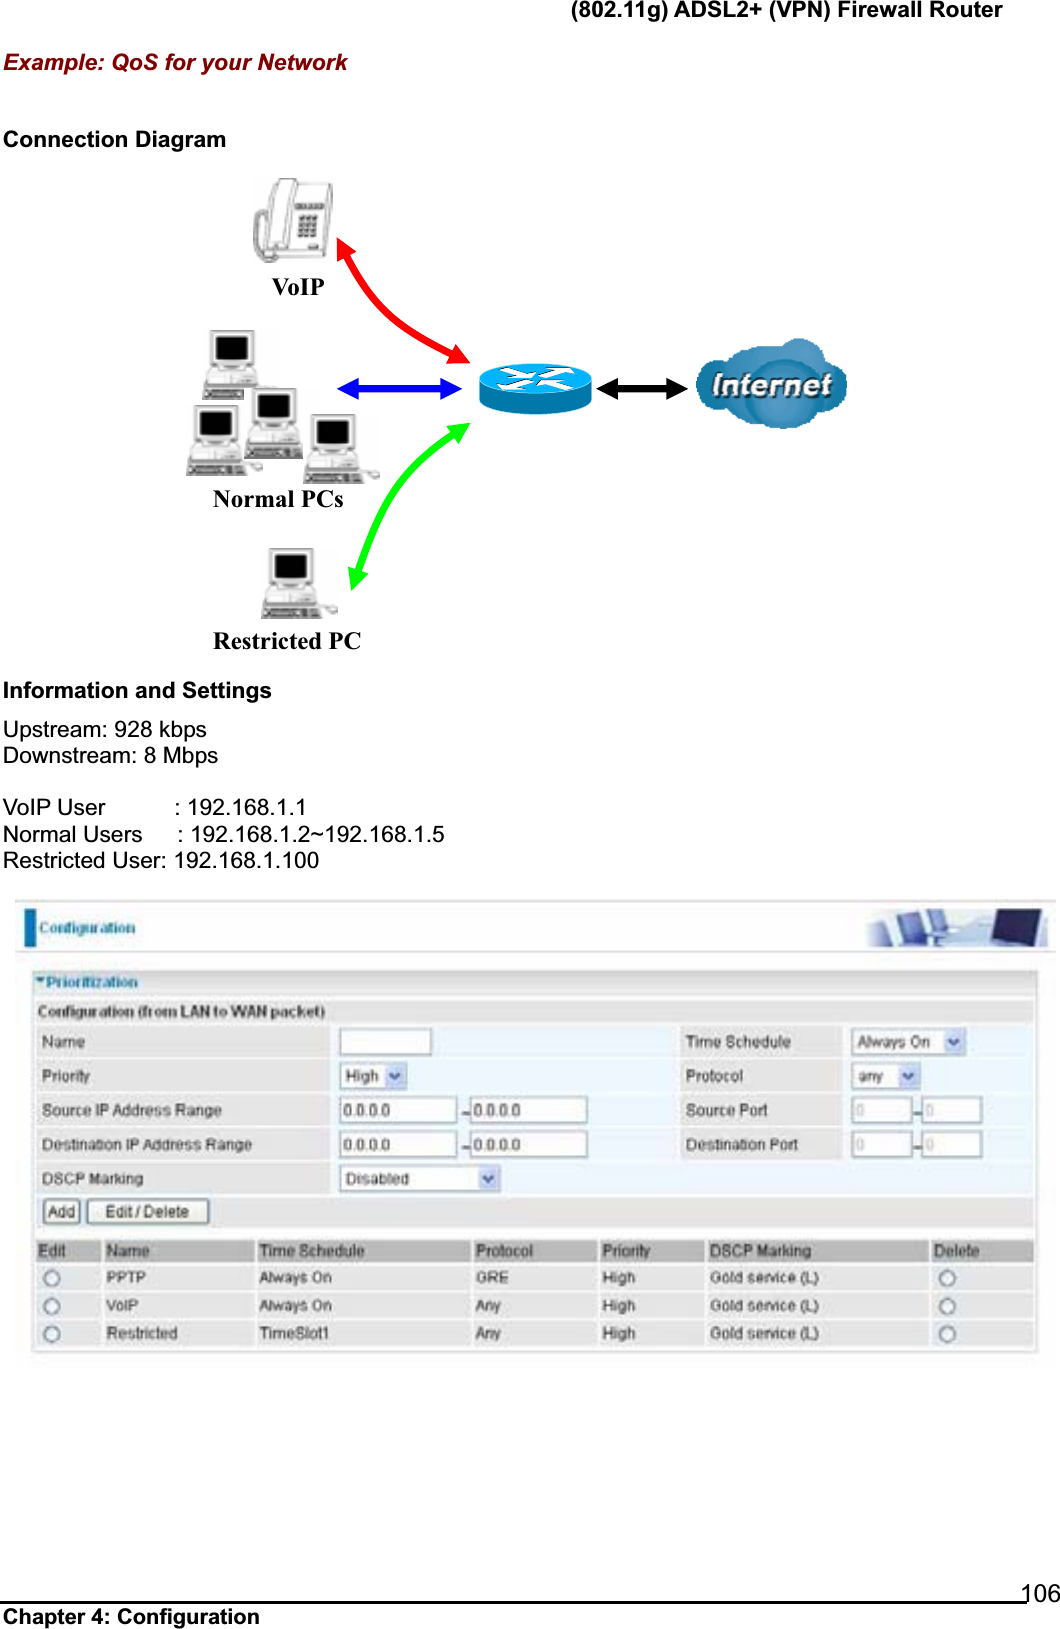       (802.11g) ADSL2+ (VPN) Firewall Router Chapter 4: Configuration      106Example: QoS for your Network Connection Diagram Information and Settings Upstream: 928 kbps Downstream: 8 Mbps VoIP User      : 192.168.1.1 Normal Users   : 192.168.1.2~192.168.1.5 Restricted User: 192.168.1.100 Restricted PC Normal PCs Vo I P 